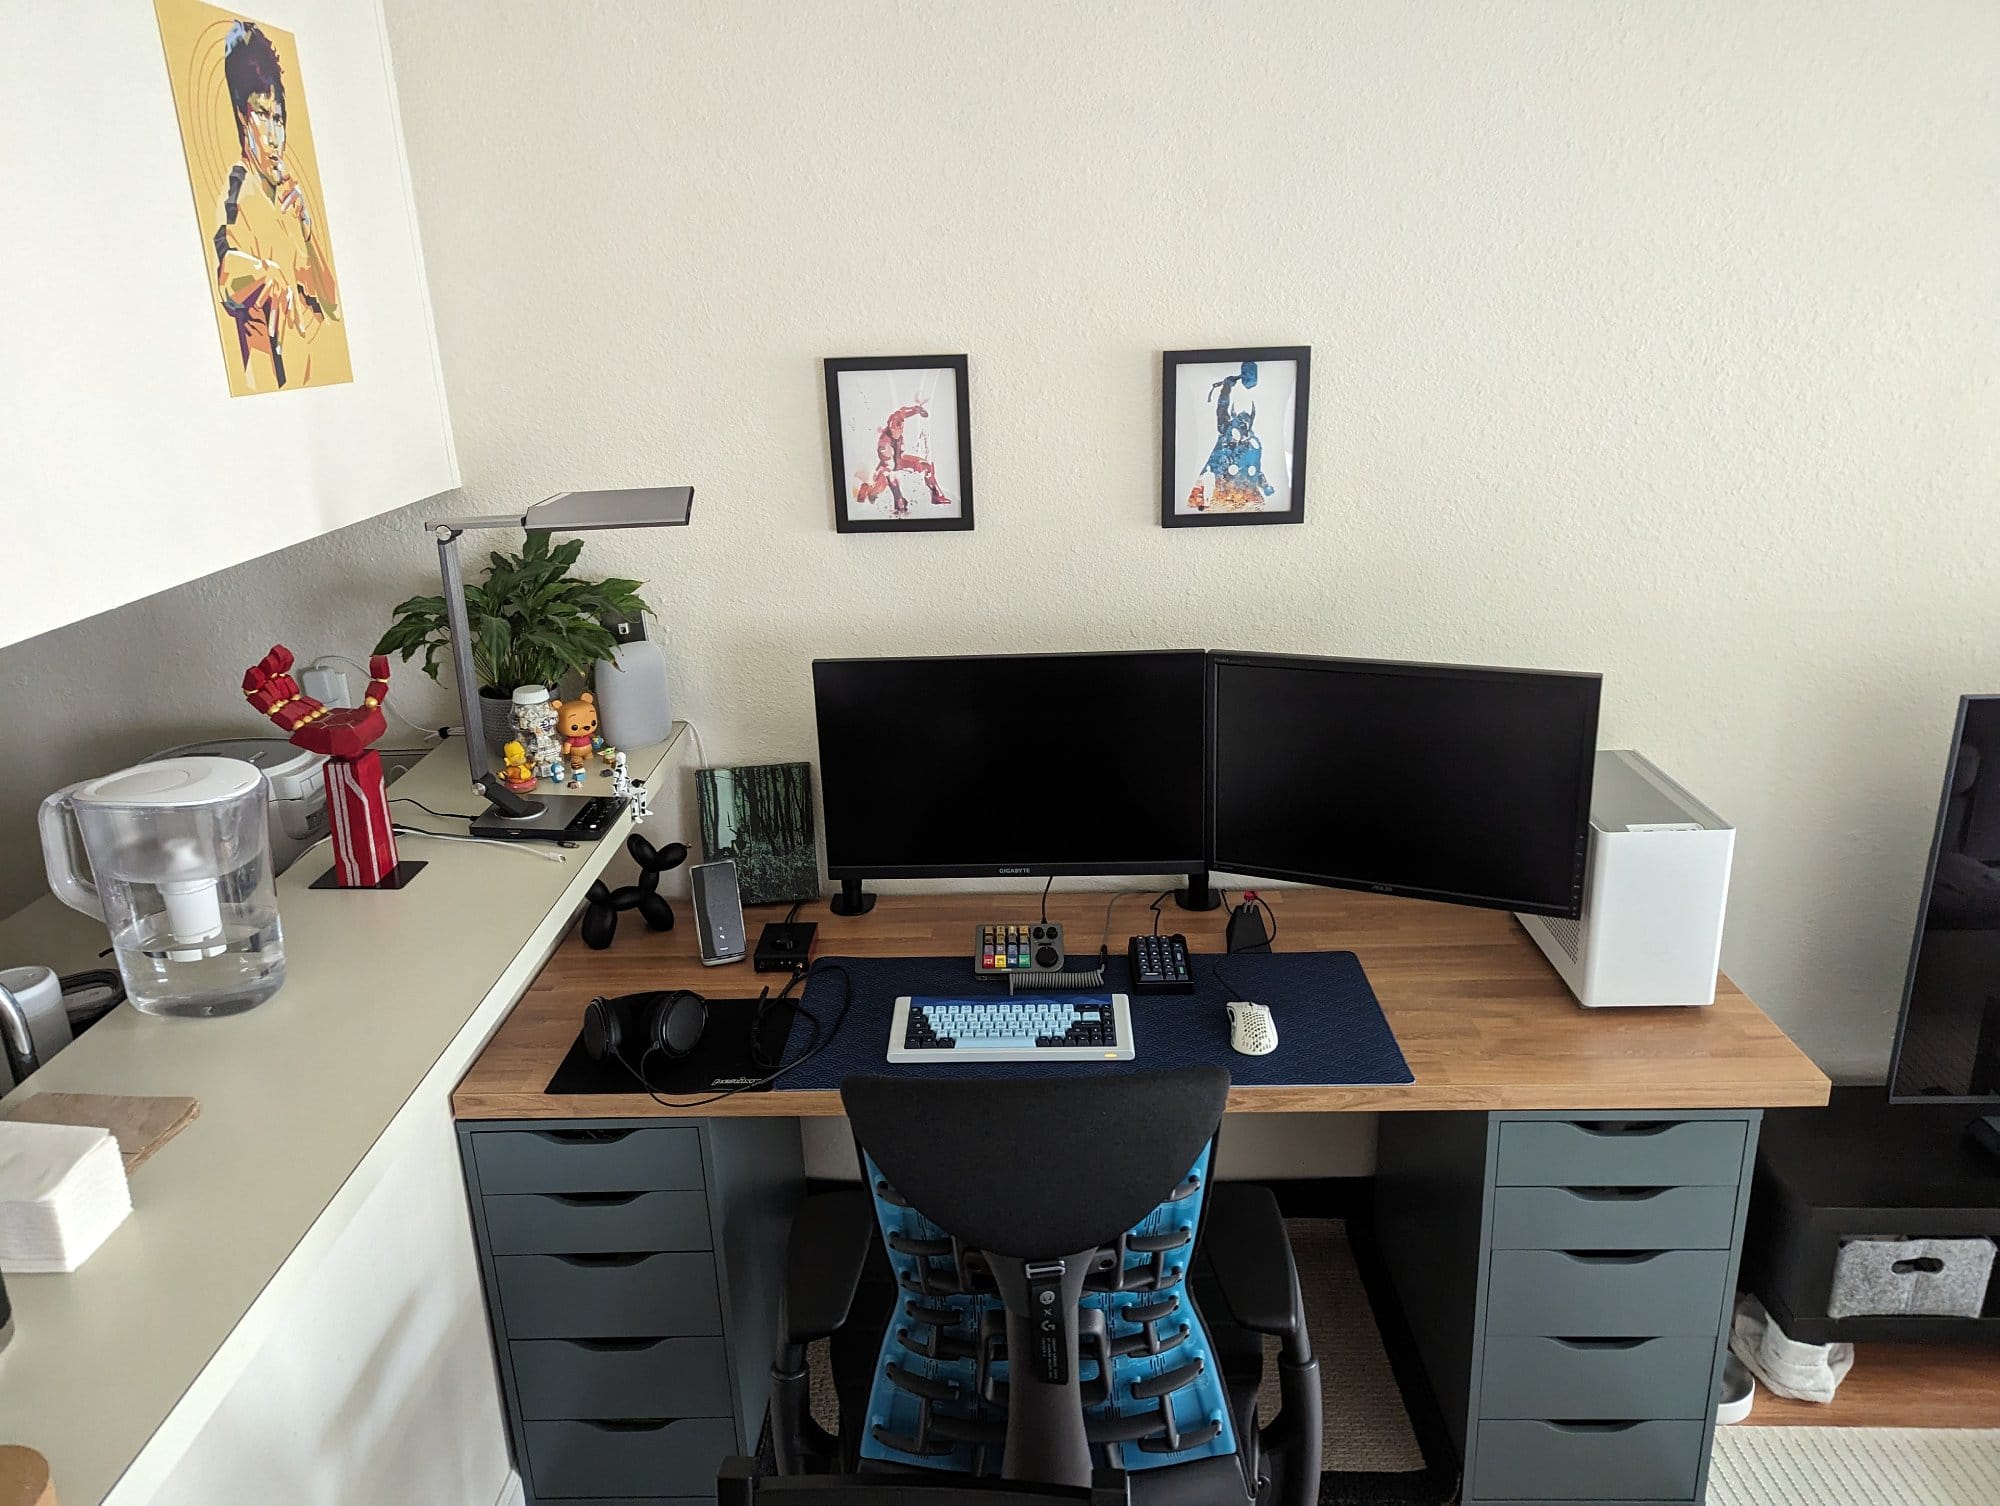 A home office with an ergonomic Embody chair in front of a desk with dual monitors, a mechanical keyboard, and various items, with framed artwork on the wall above